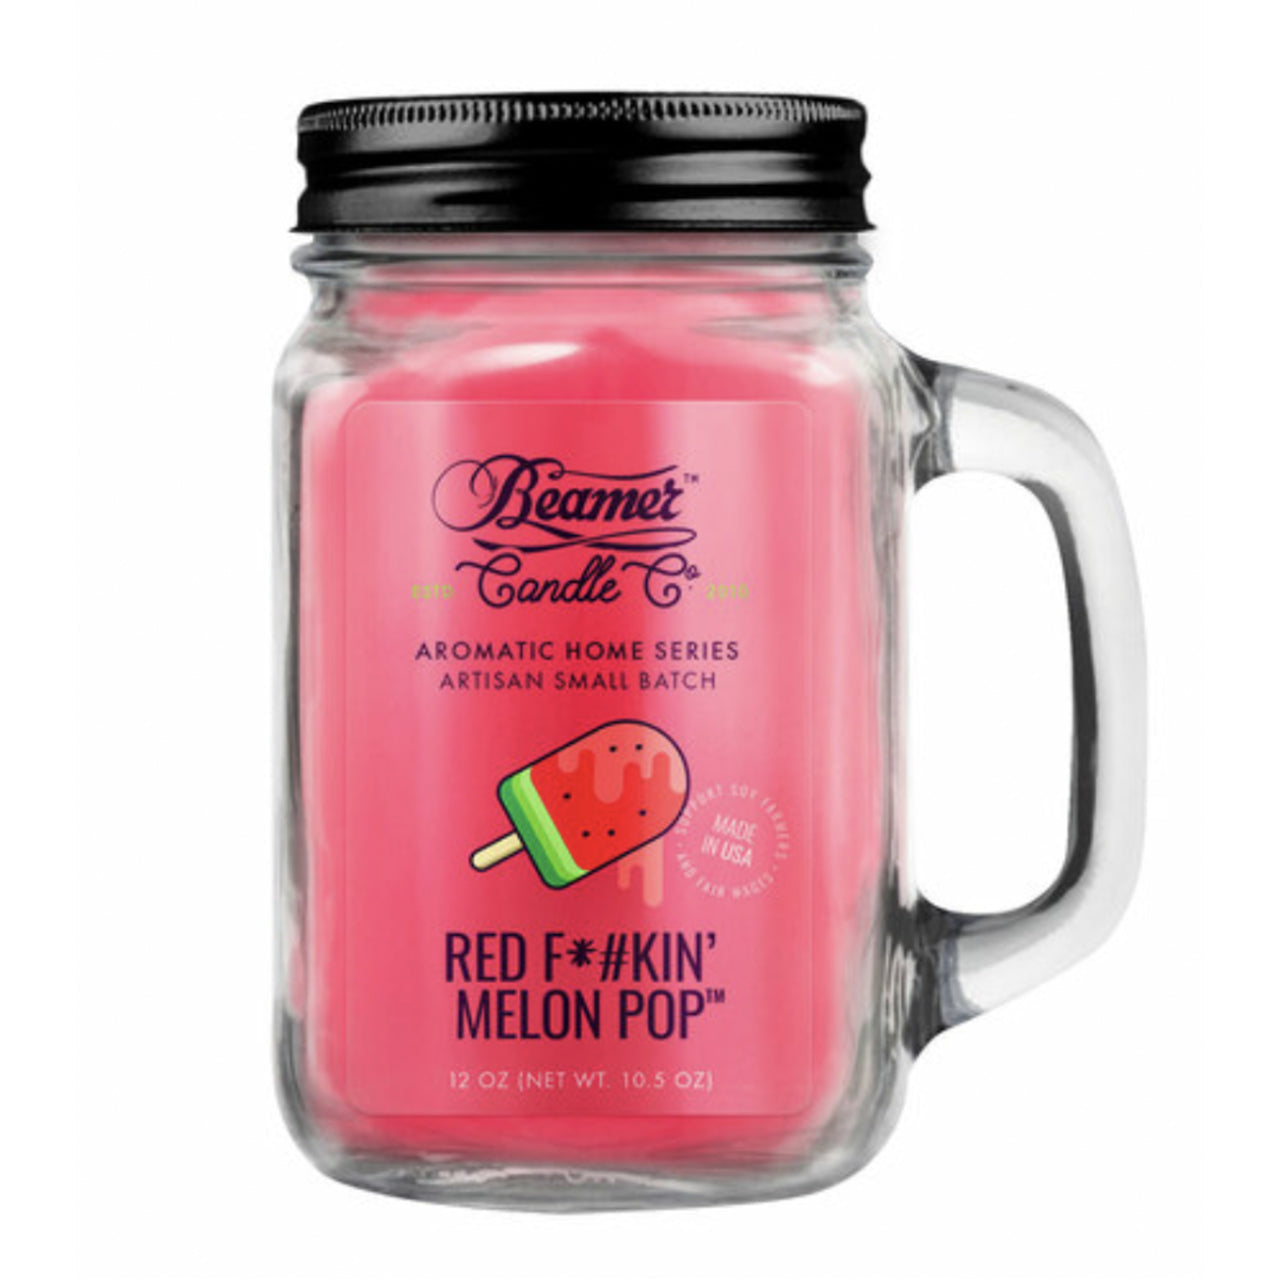 Beamer Candle Co Aromatic Home Series - Red F*#kin’ Melon Pop 12oz